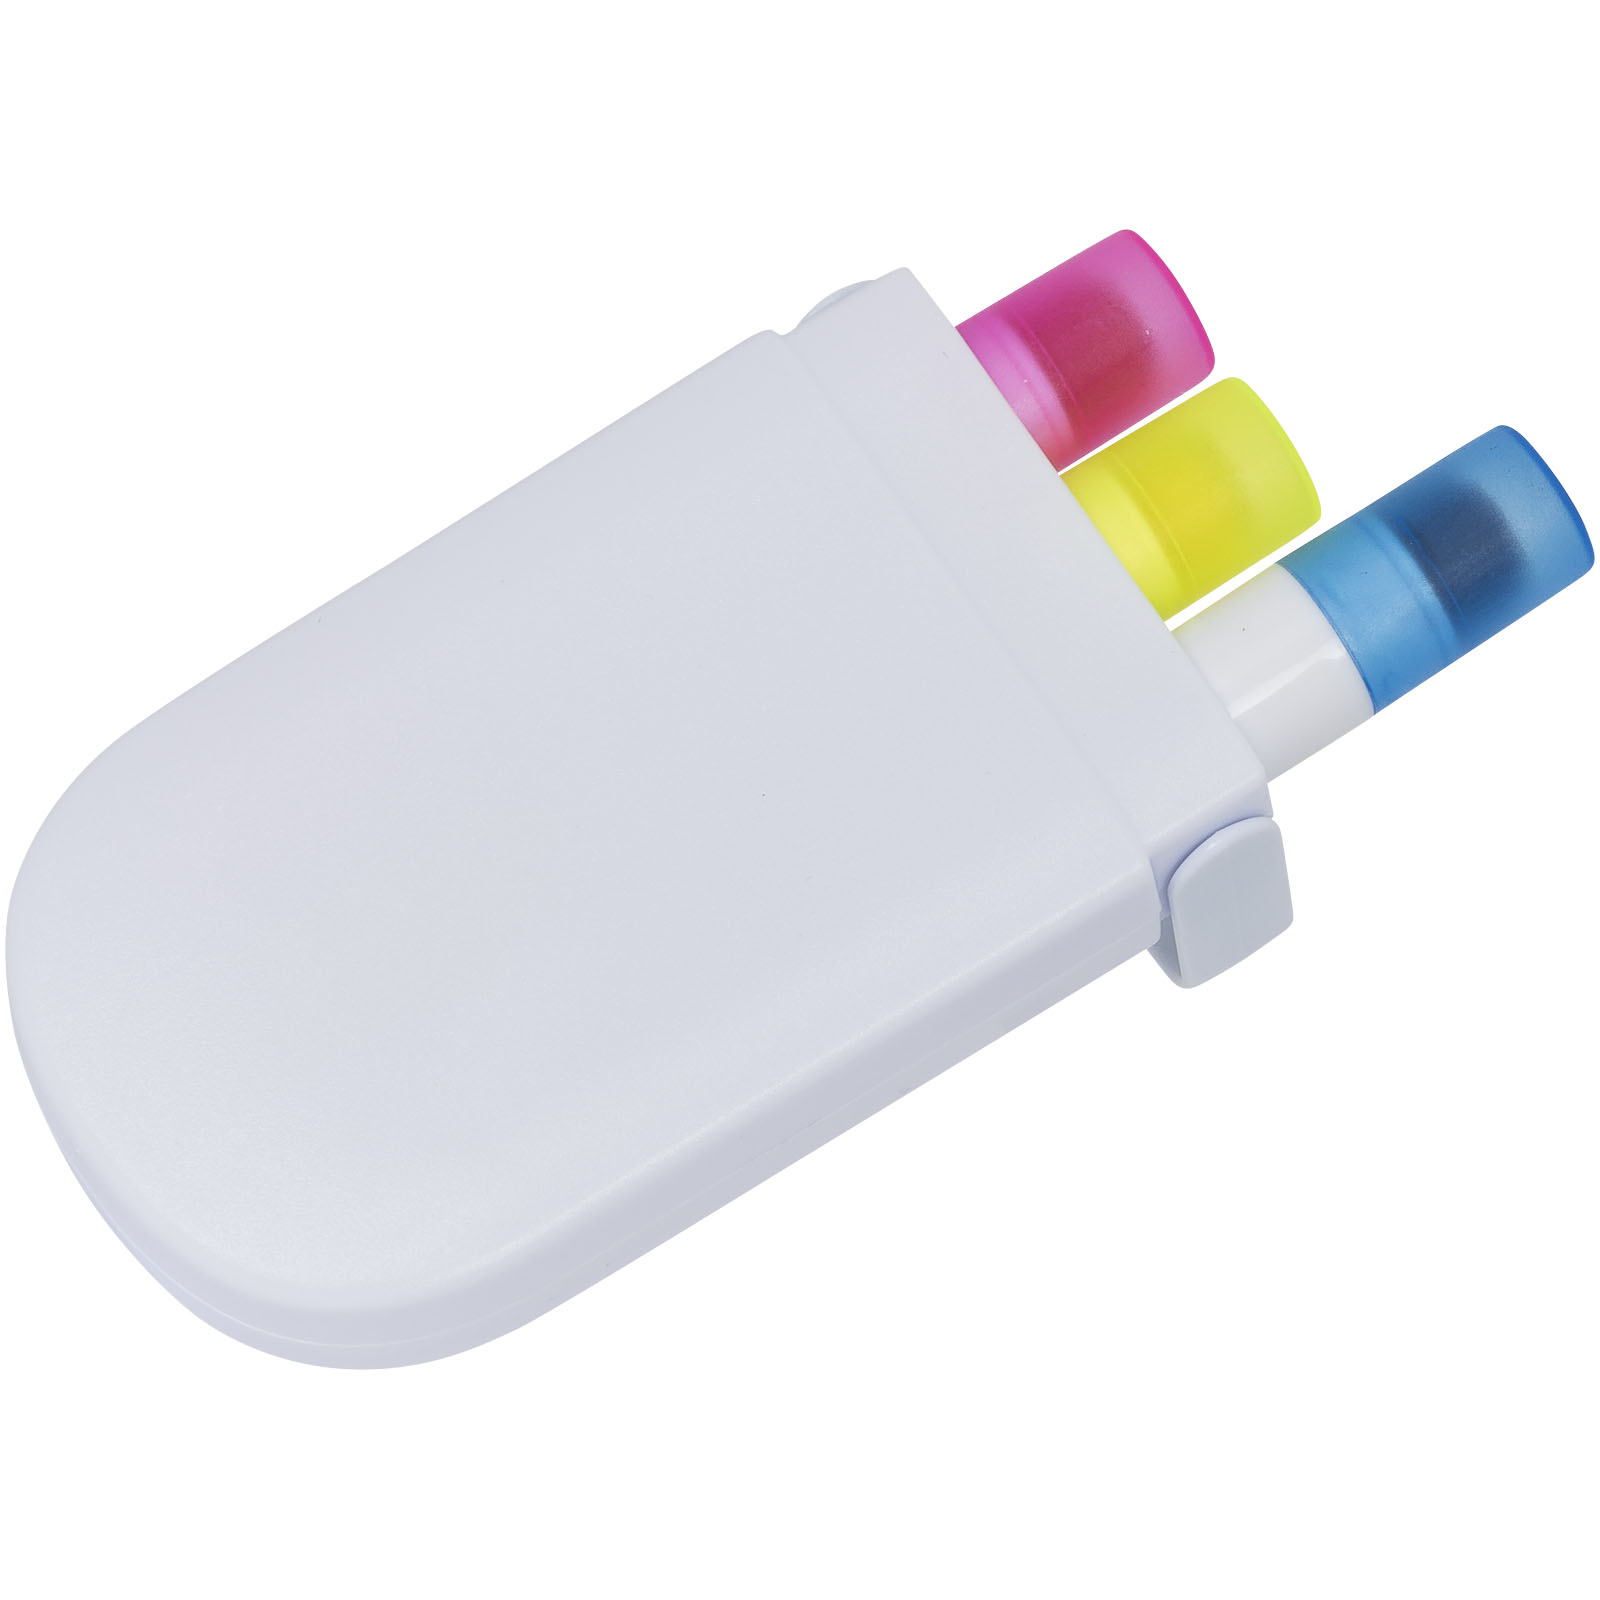 A plastic case that contains gel highlighters in various colors from Wormleighton. - Dodford